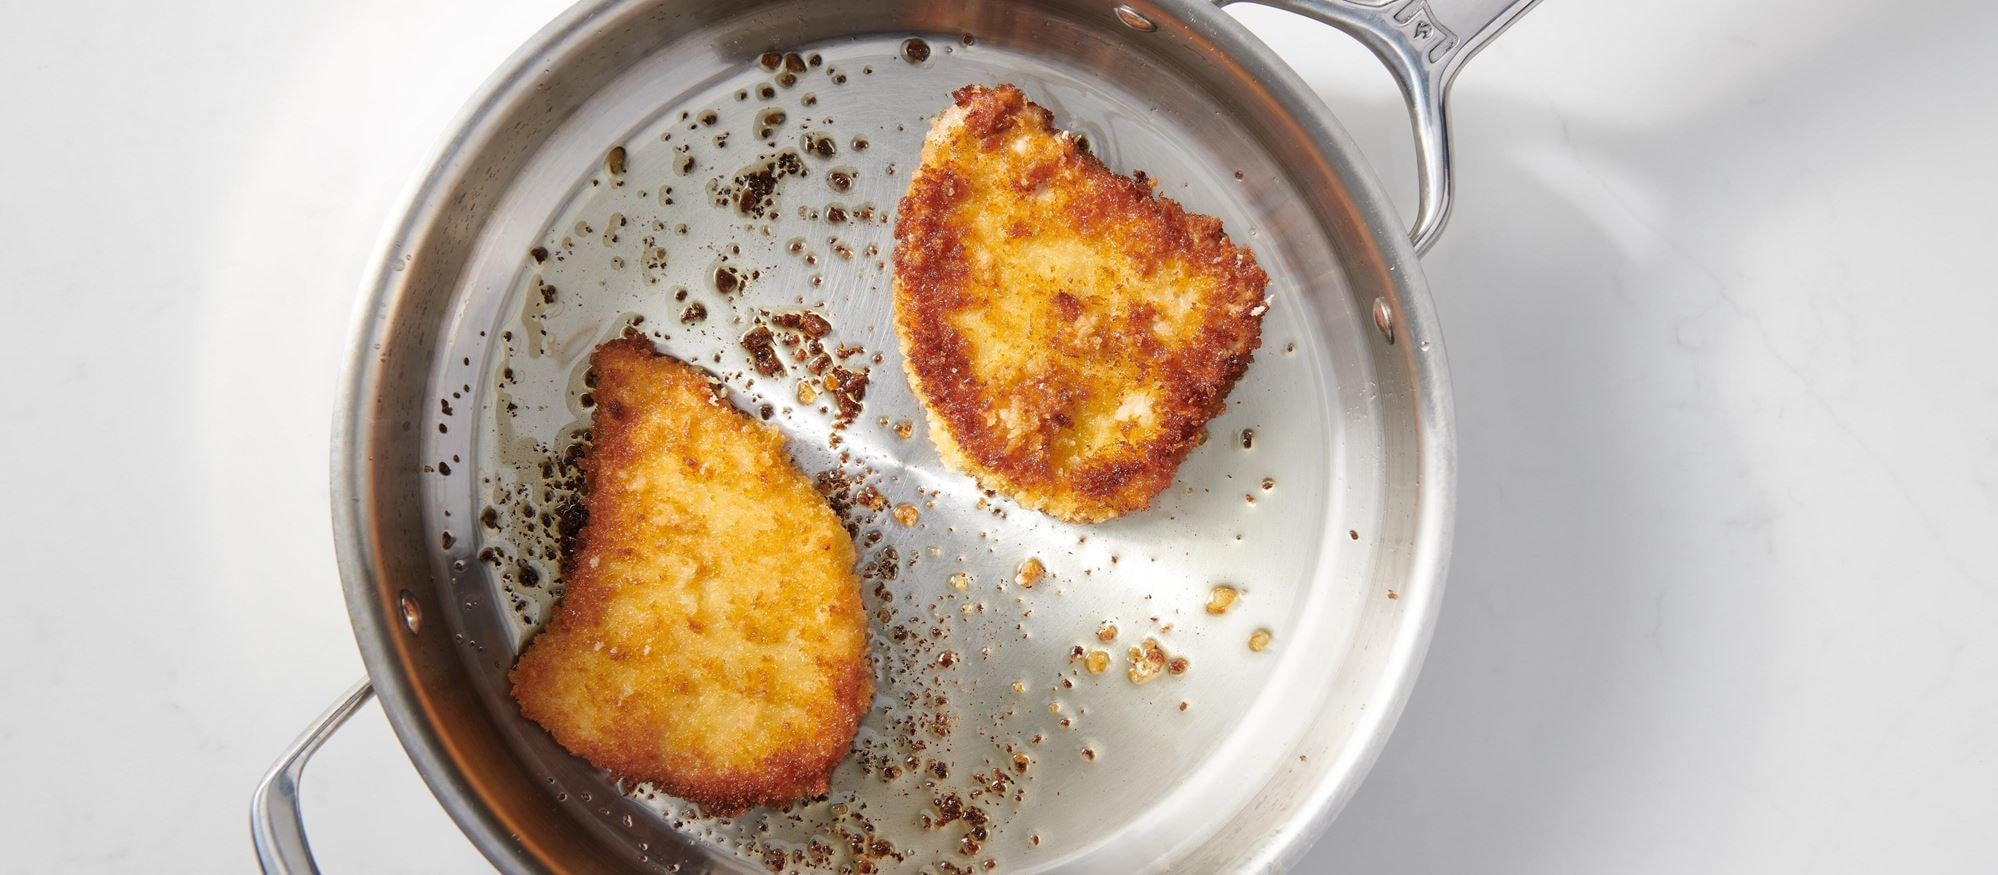 Easy and delicious Pork Schnitzel  recipe using the Panfry Mode setting of your Wolf Oven